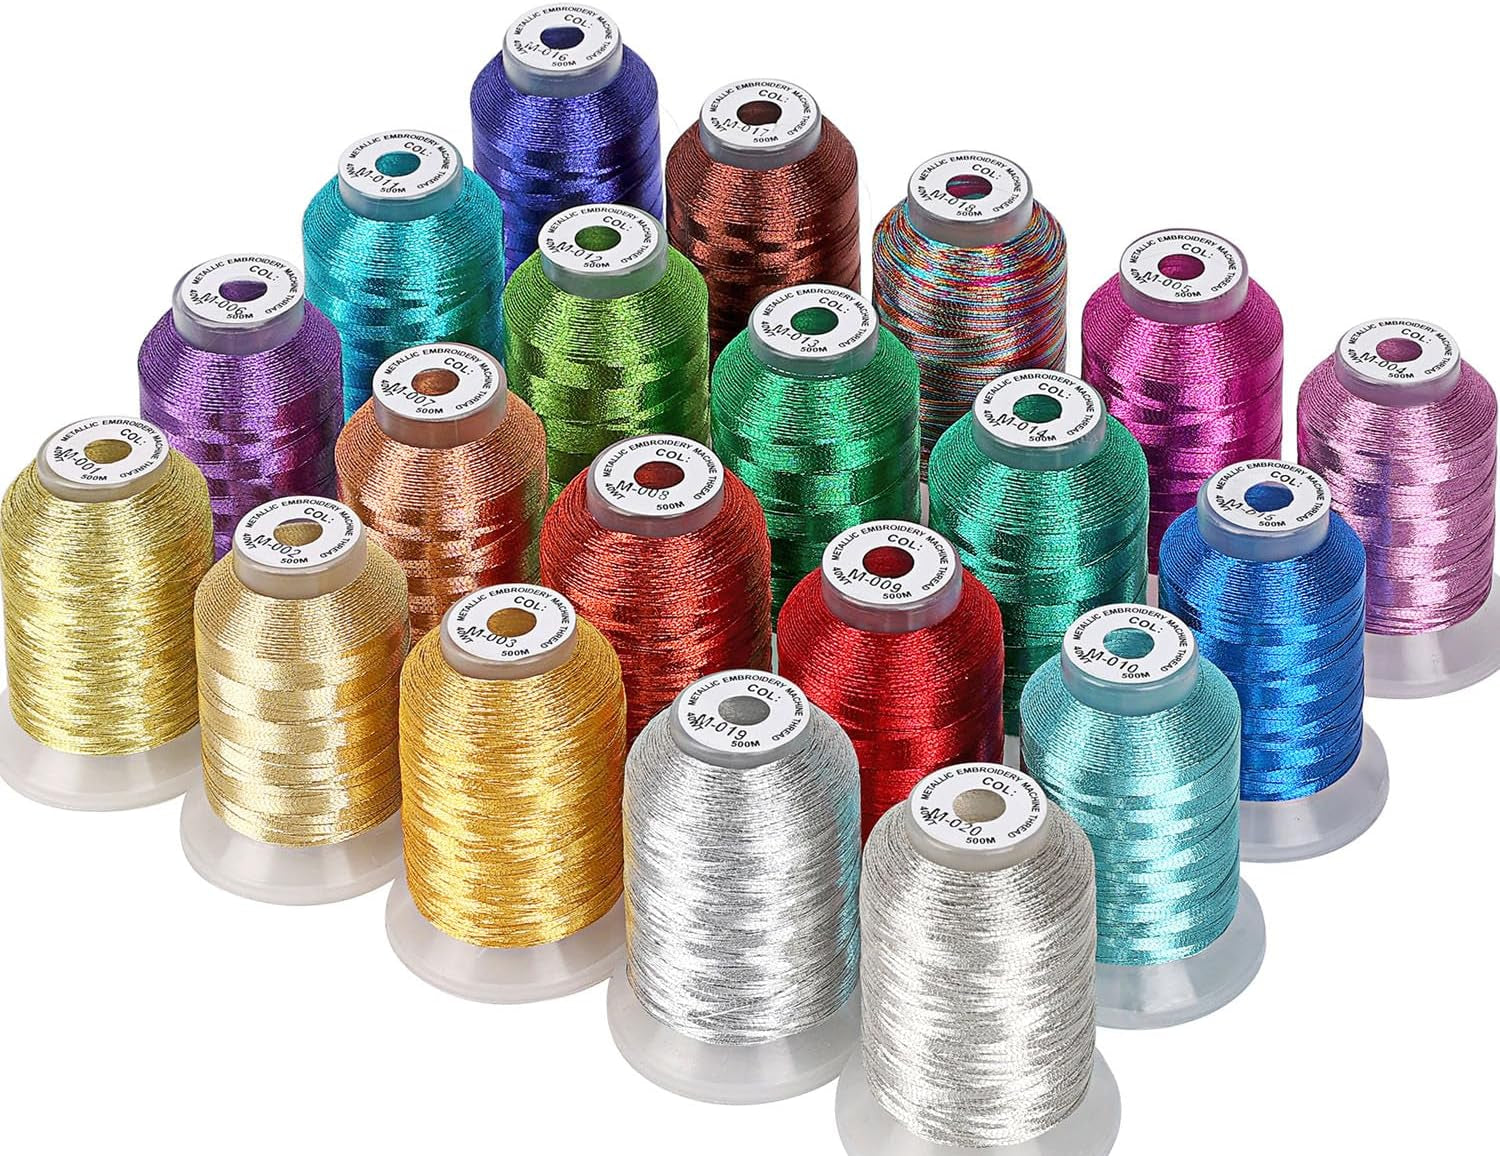 21 Assorted Colors Metallic Embroidery Machine Thread Kit 500M (550Y) Each Spool for Computerized Embroidery and Decorative Sewing